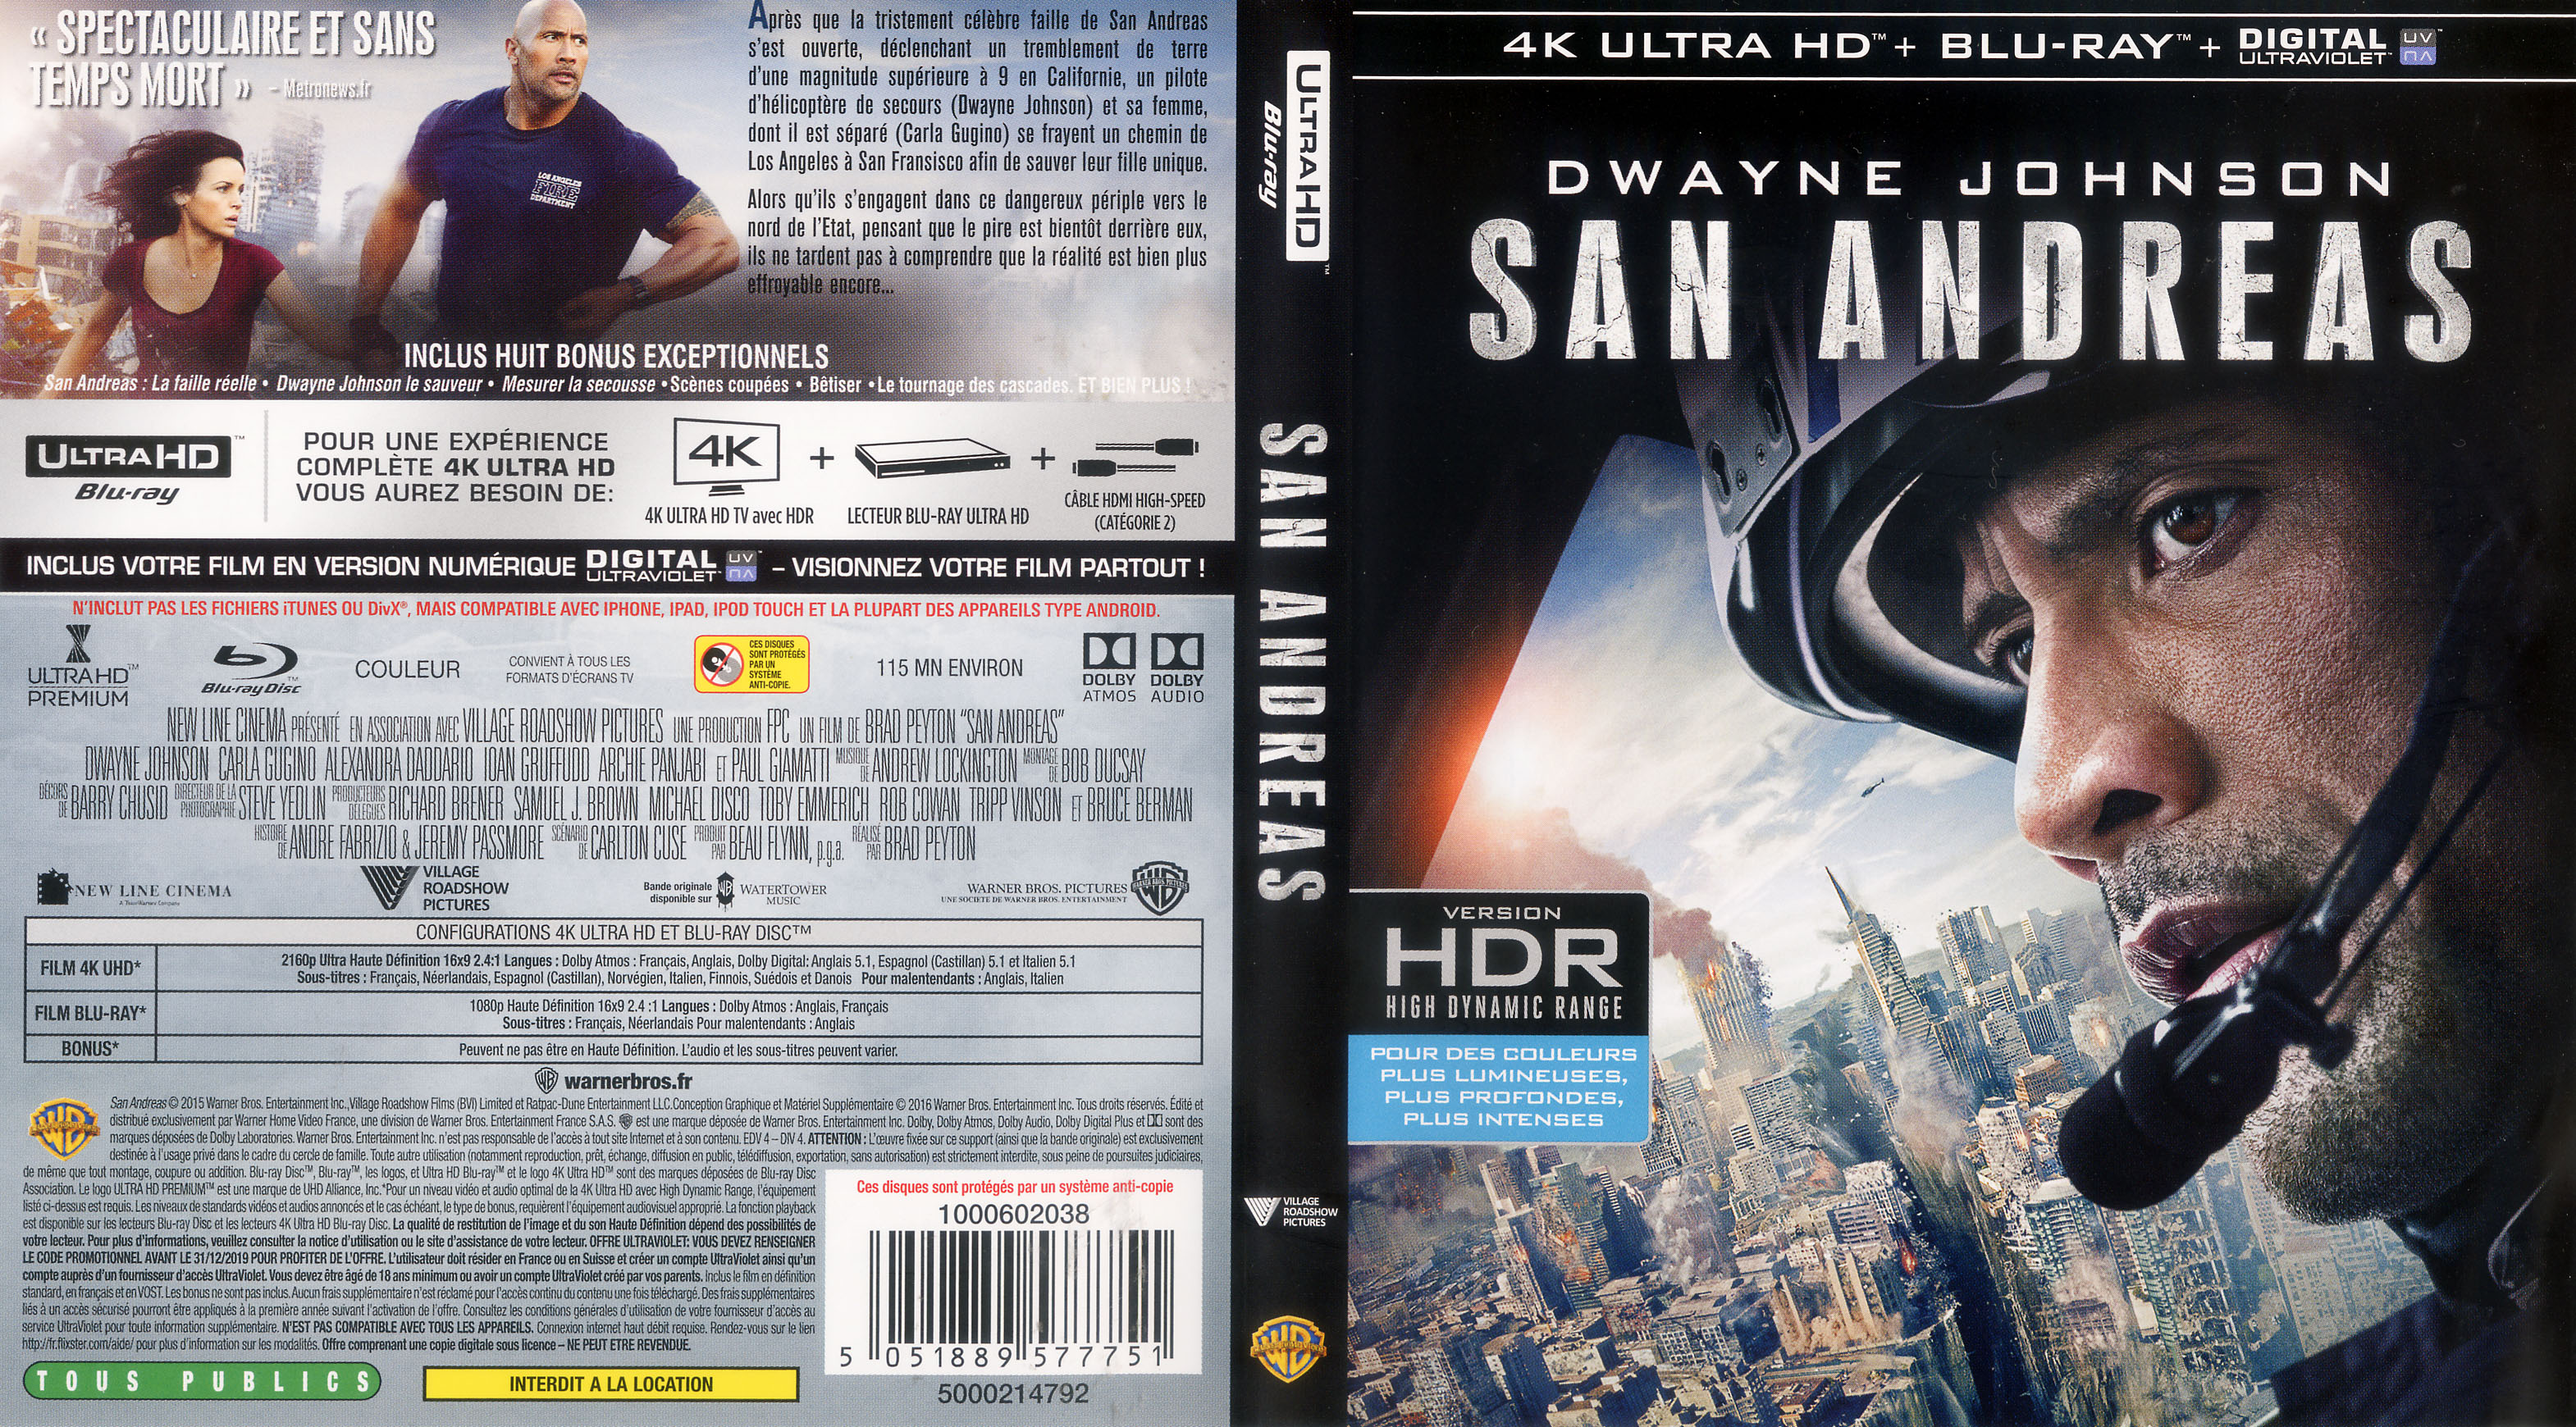 Jaquette DVD San Andreas 4K (BLU-RAY)